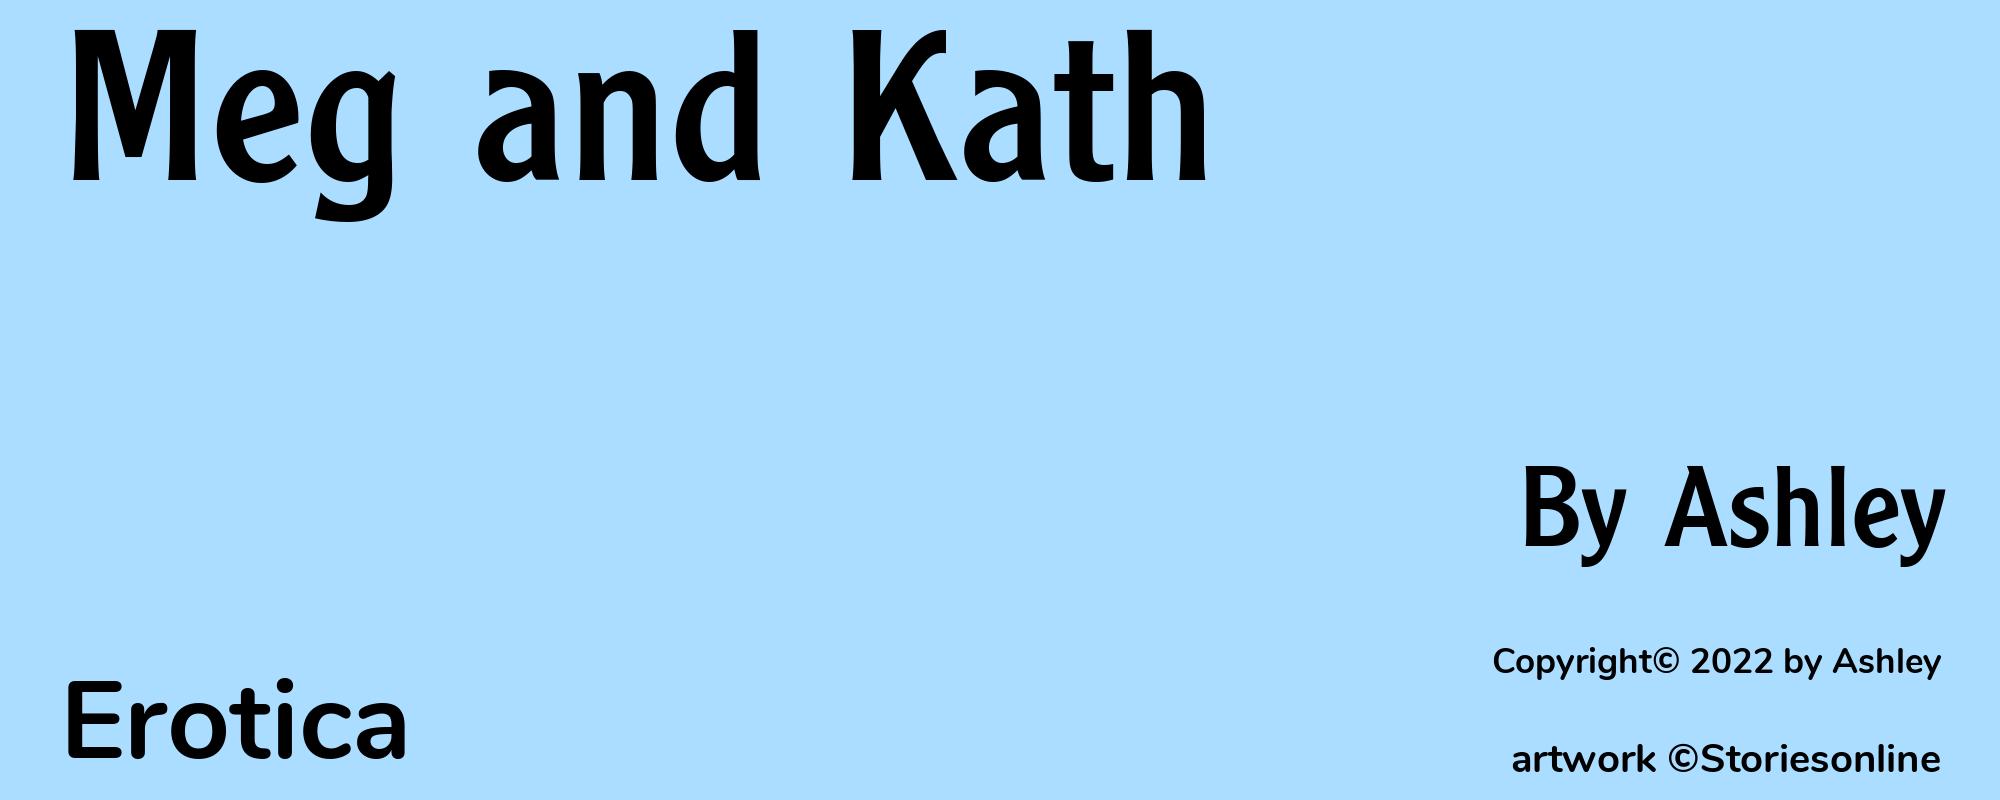 Meg and Kath - Cover